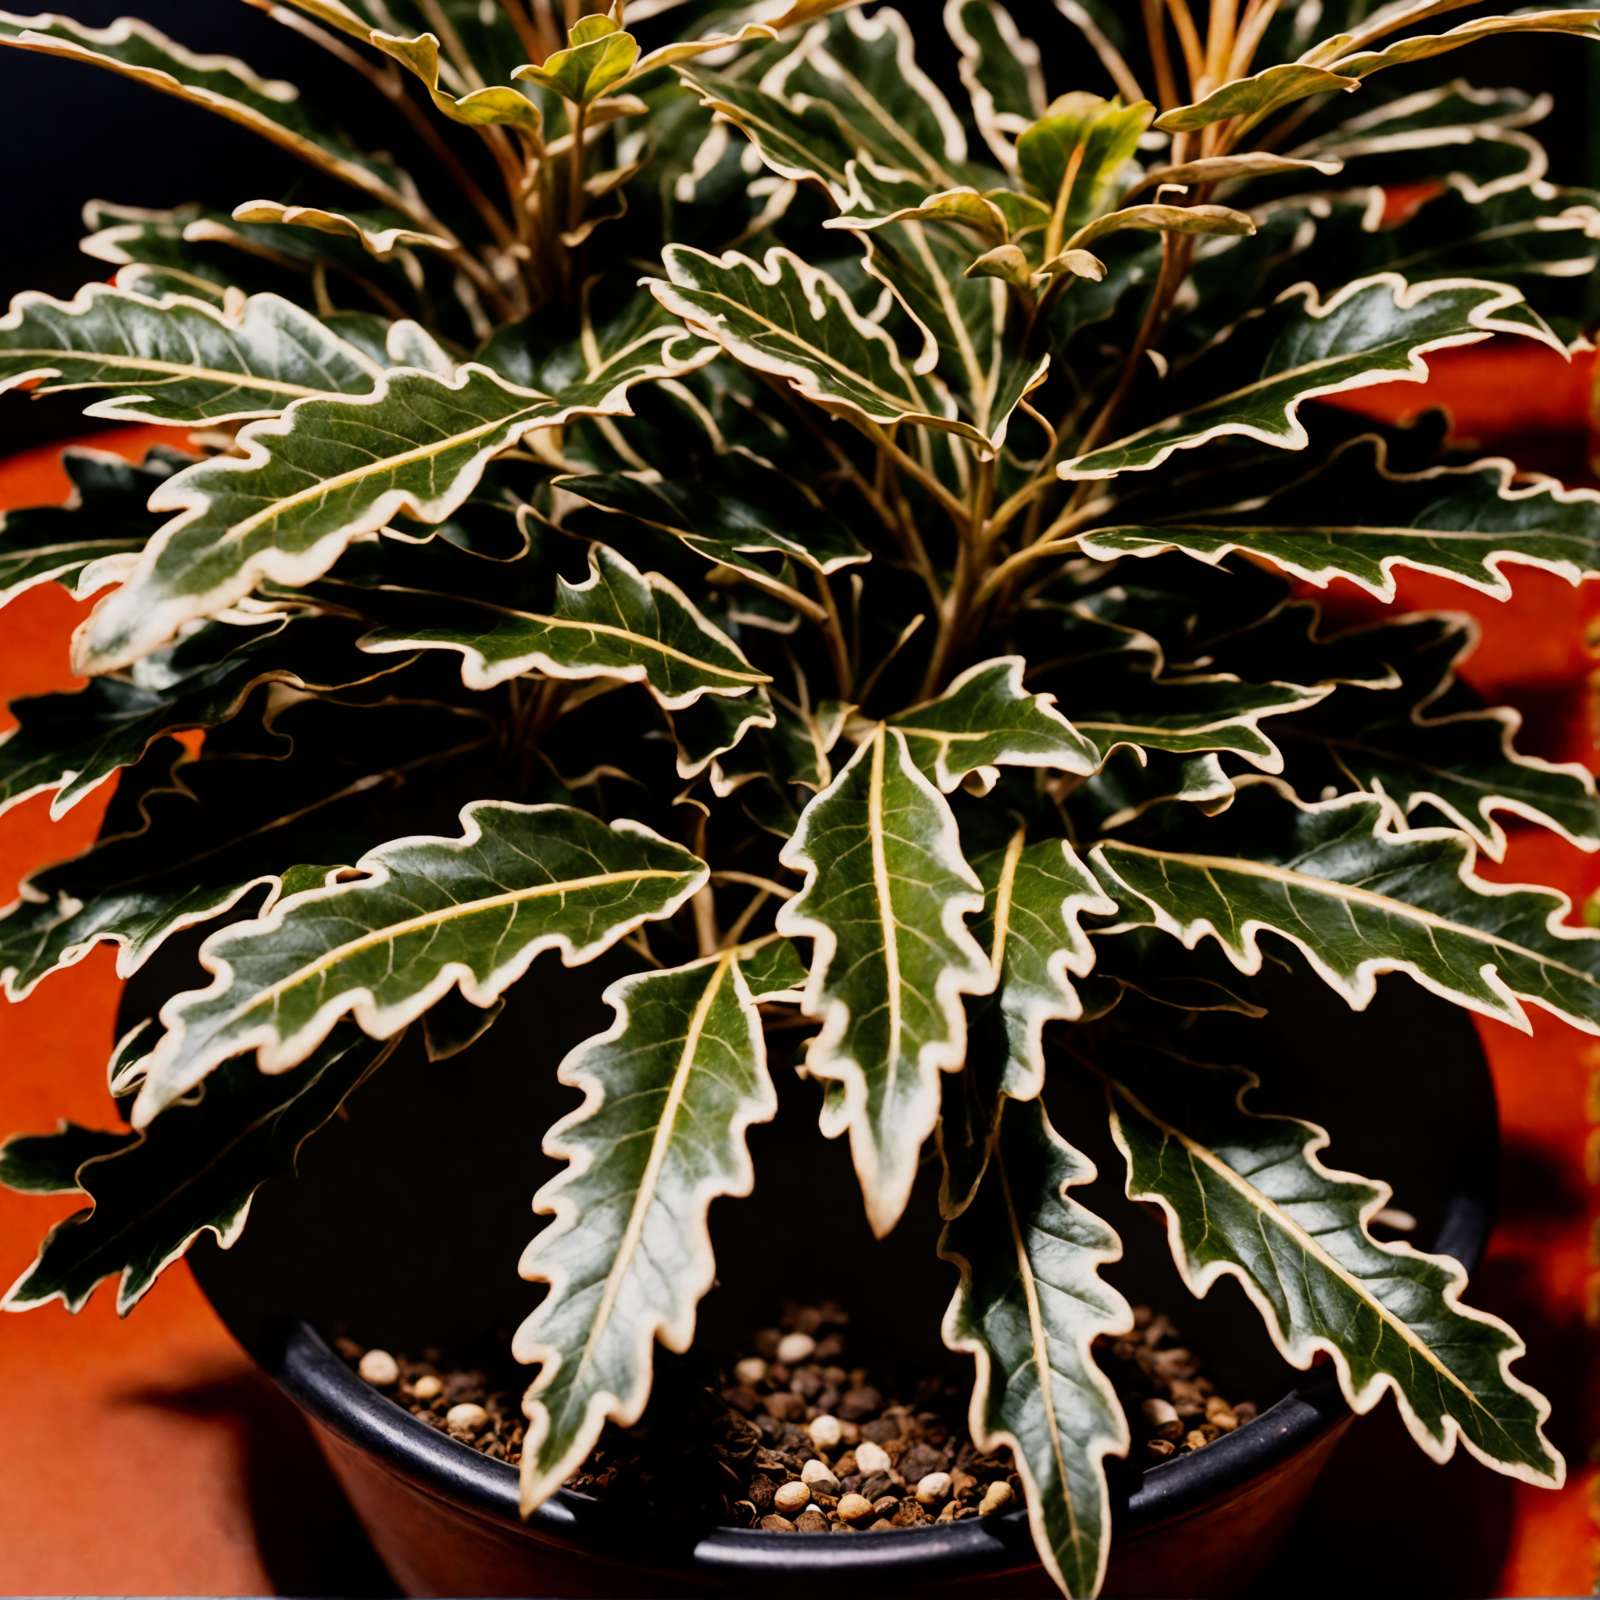 Plerandra elegantissima leaves in a bowl and planter, with a dark background and clear indoor lighting.